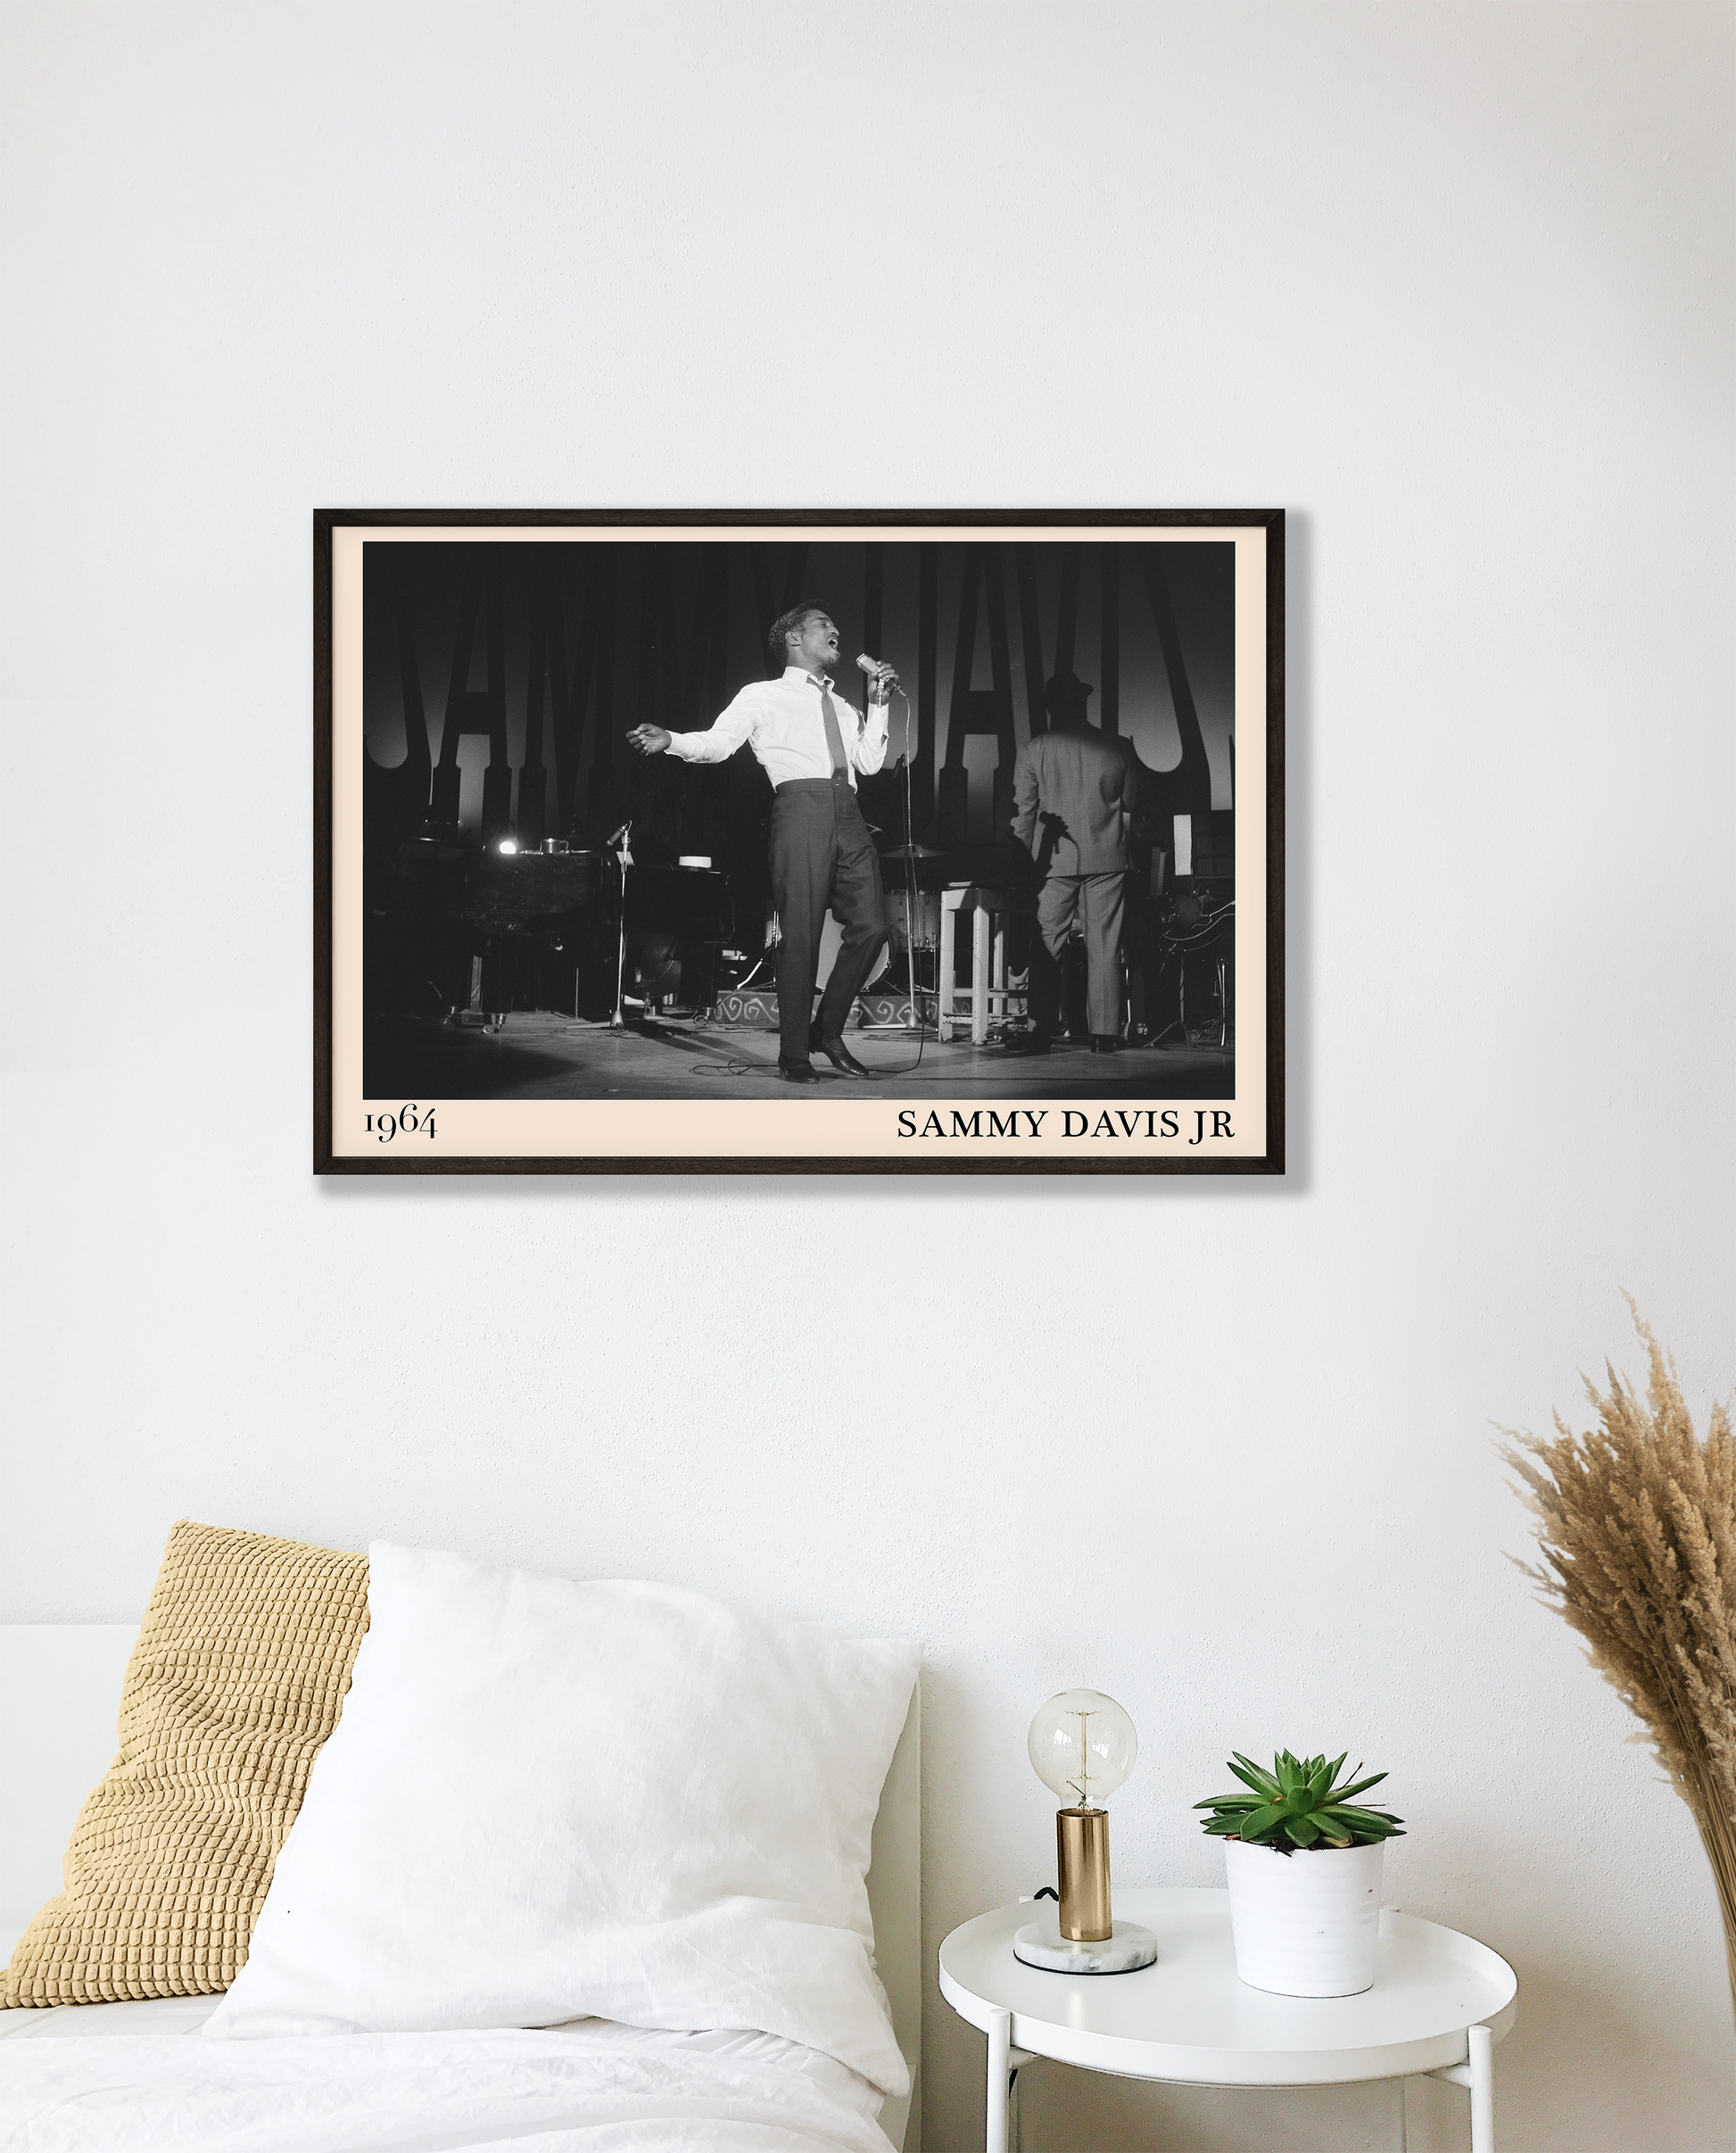 1964 picture of Sammy Davis Jr singing. Picture crafted into a cool black framed music poster, with an off-white border. Poster is hanging on a white bedroom wall